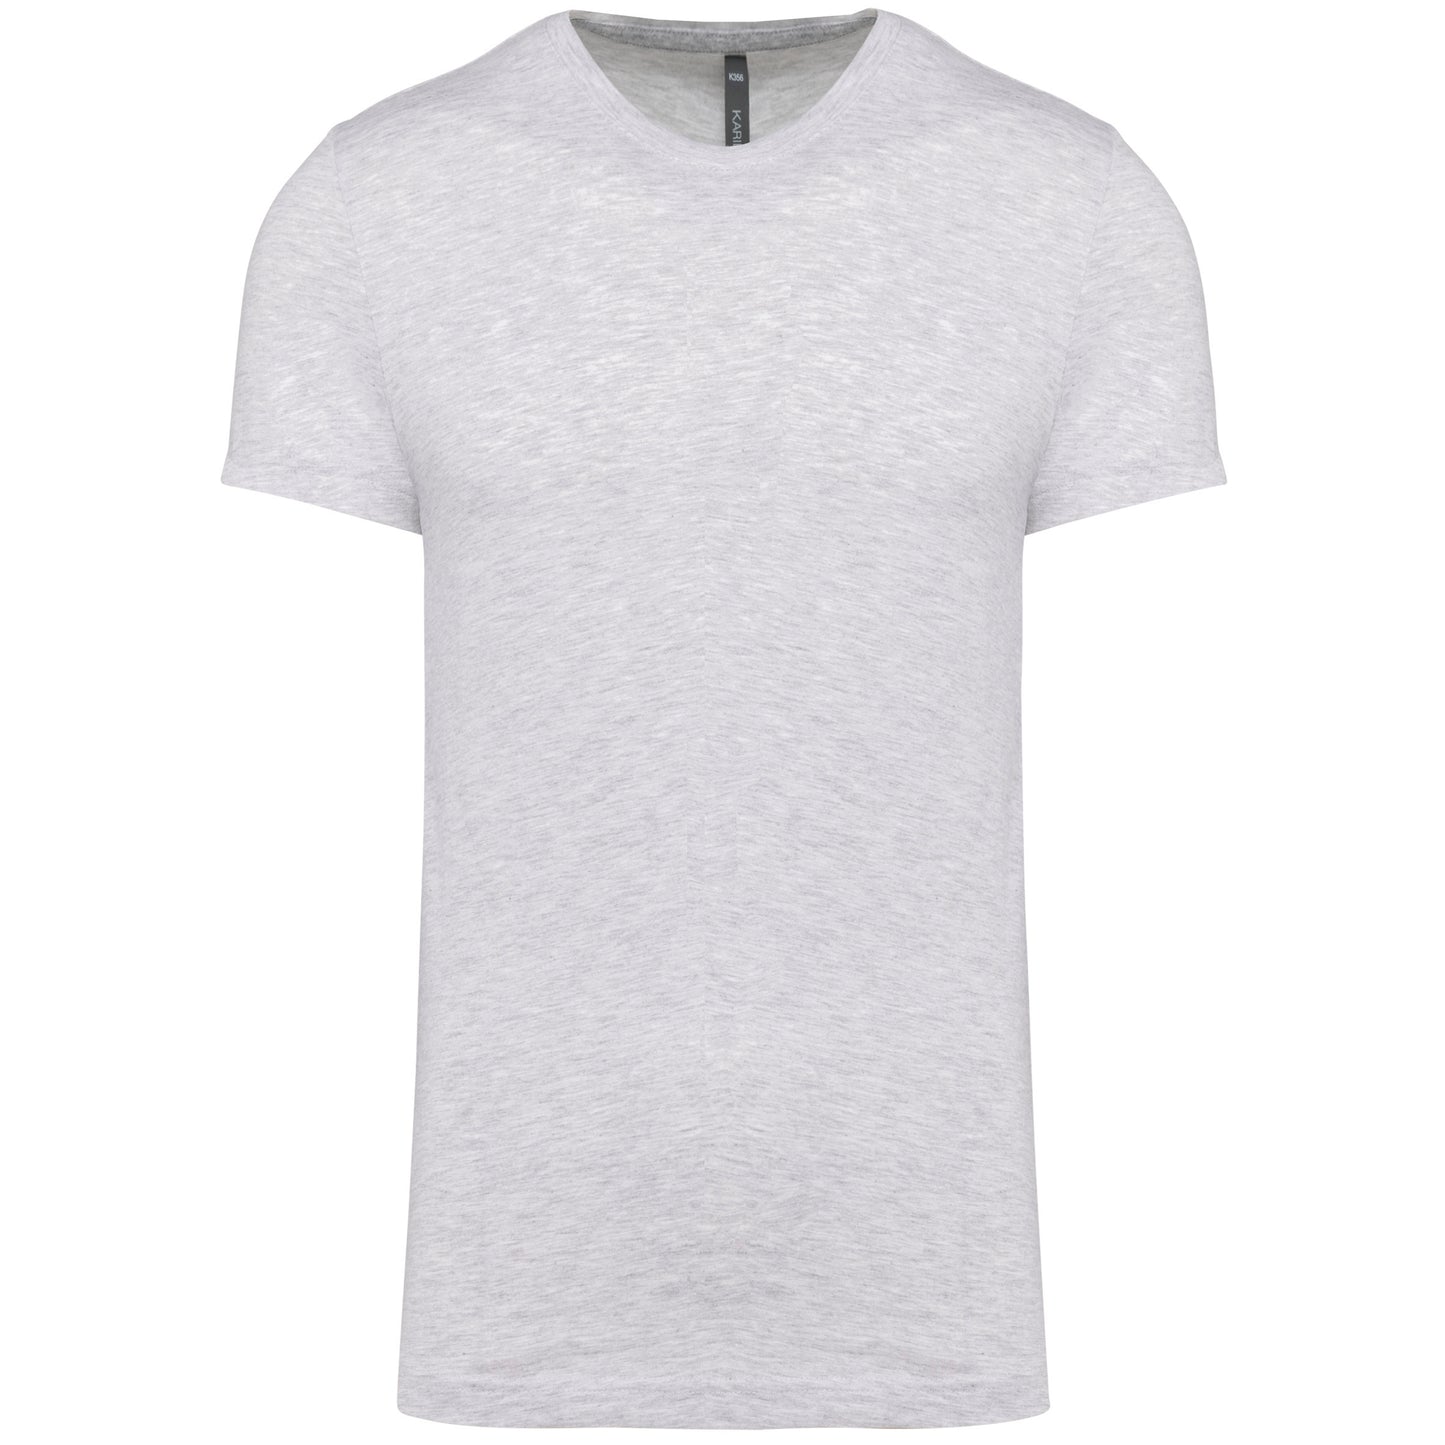 K356 - T-shirt col rond manches courtes homme